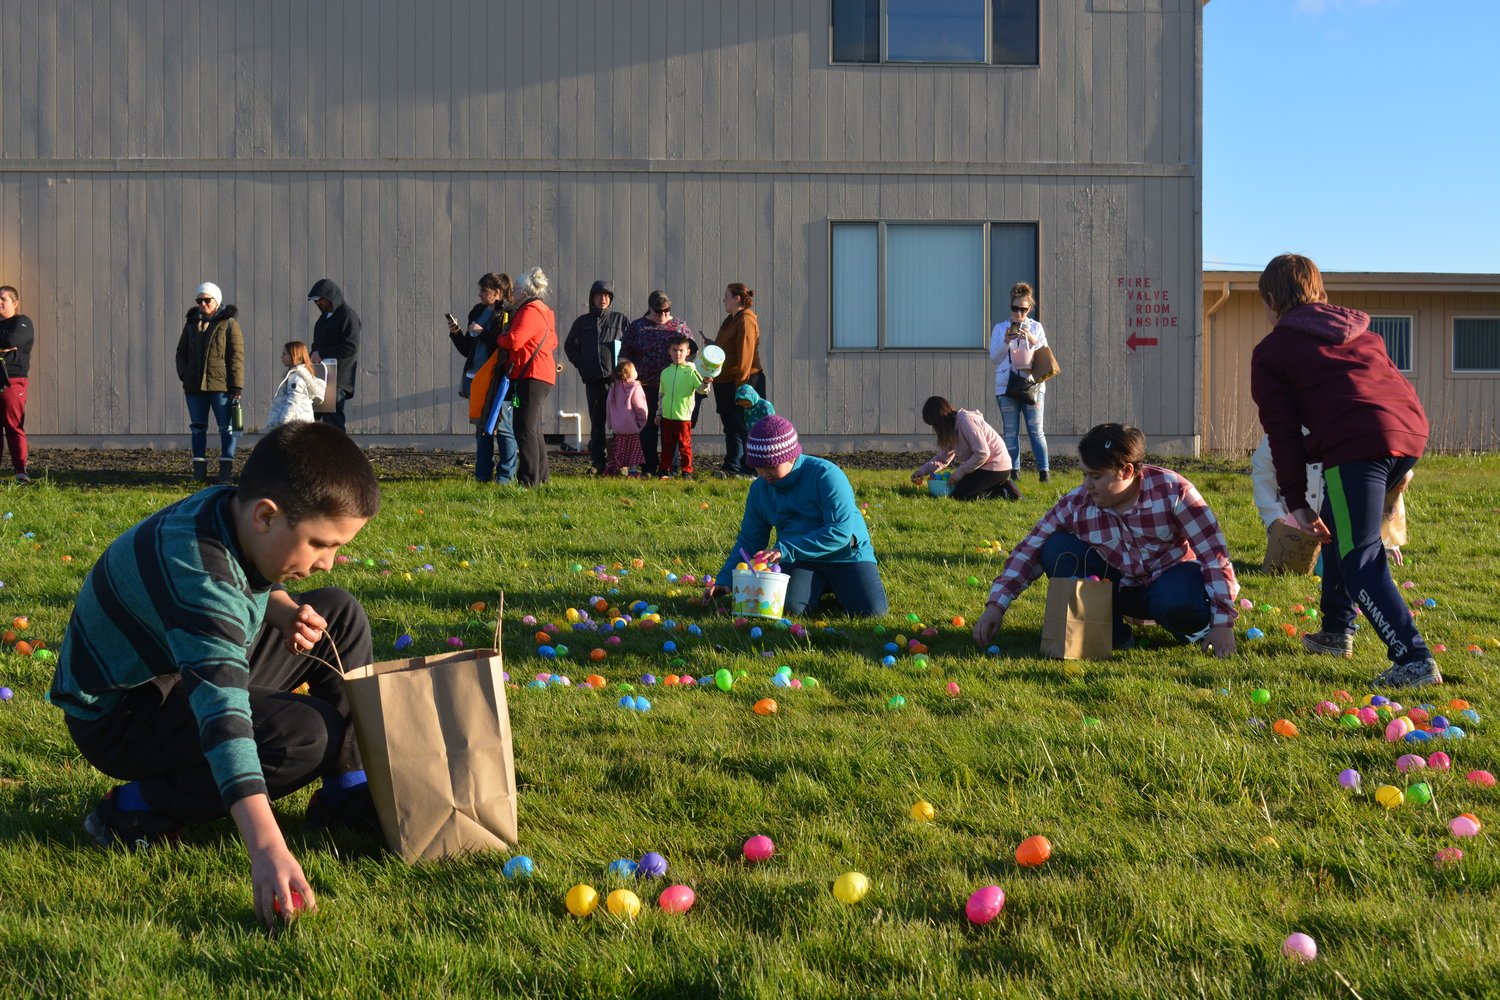 The 9- to 12-year-old group collects eggs during an Easter egg hunt at Mountain View Christian Center on April 13.